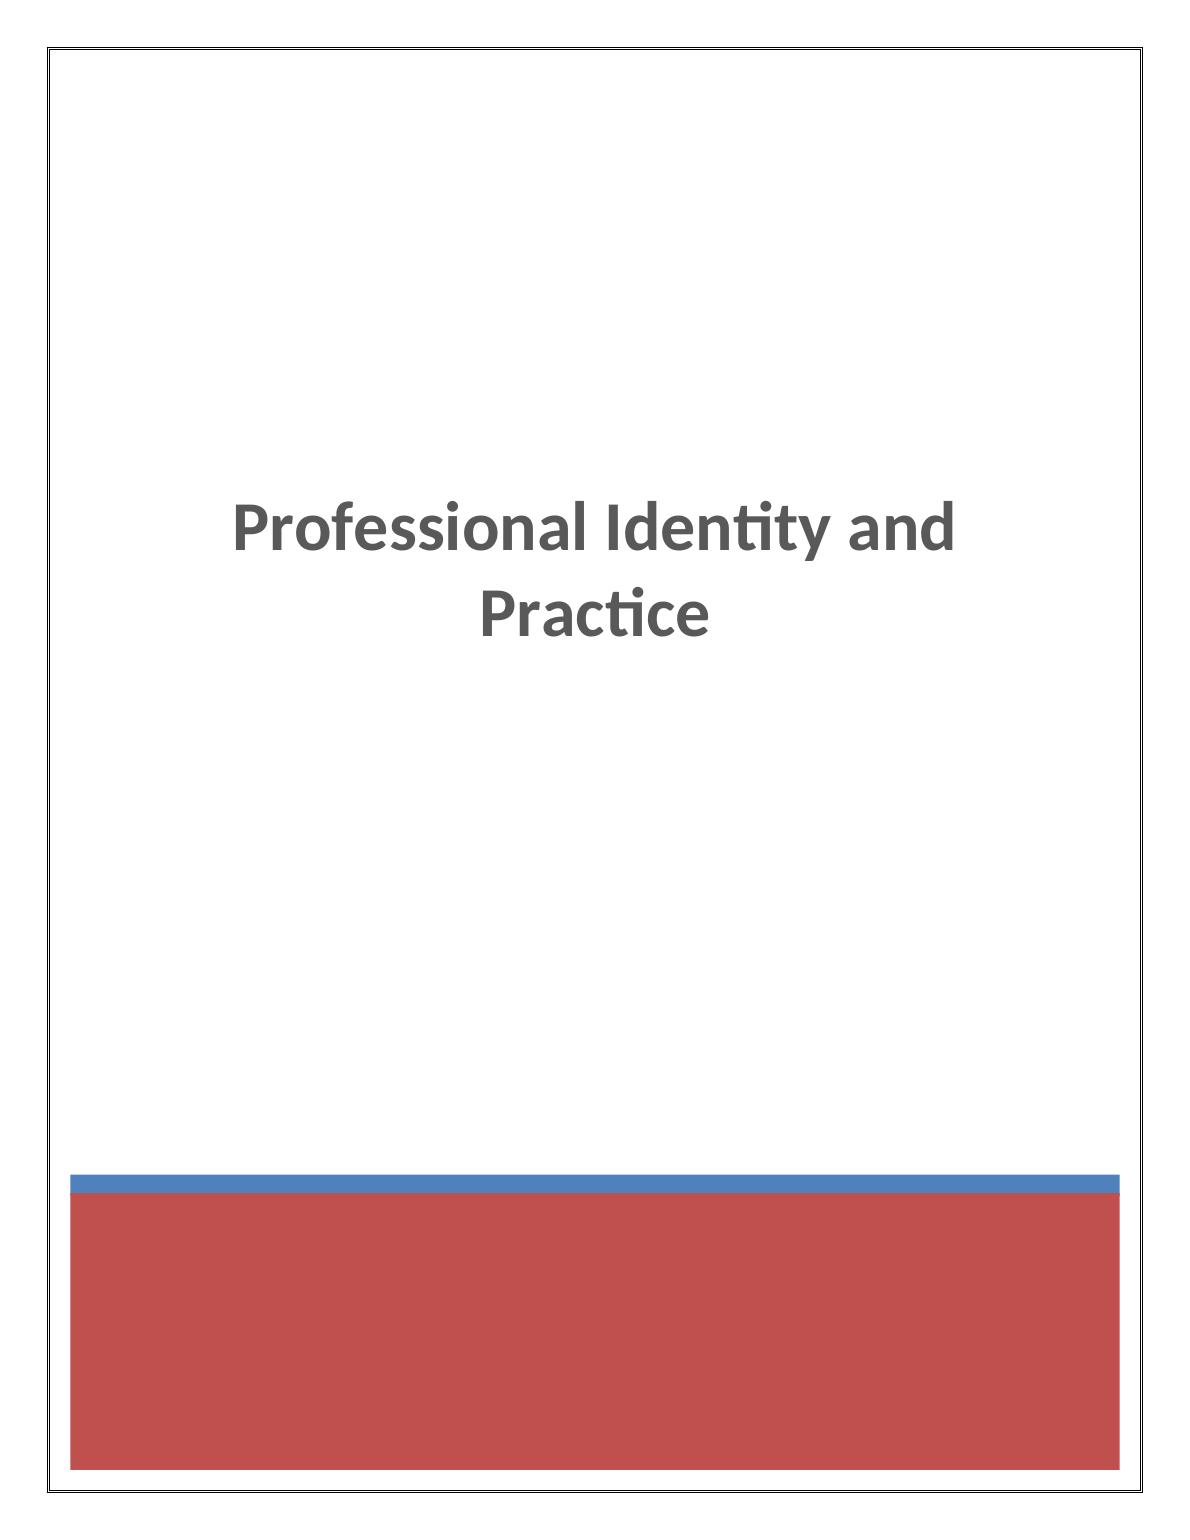 Professional Identity and Practice in Hospitality Industry_1